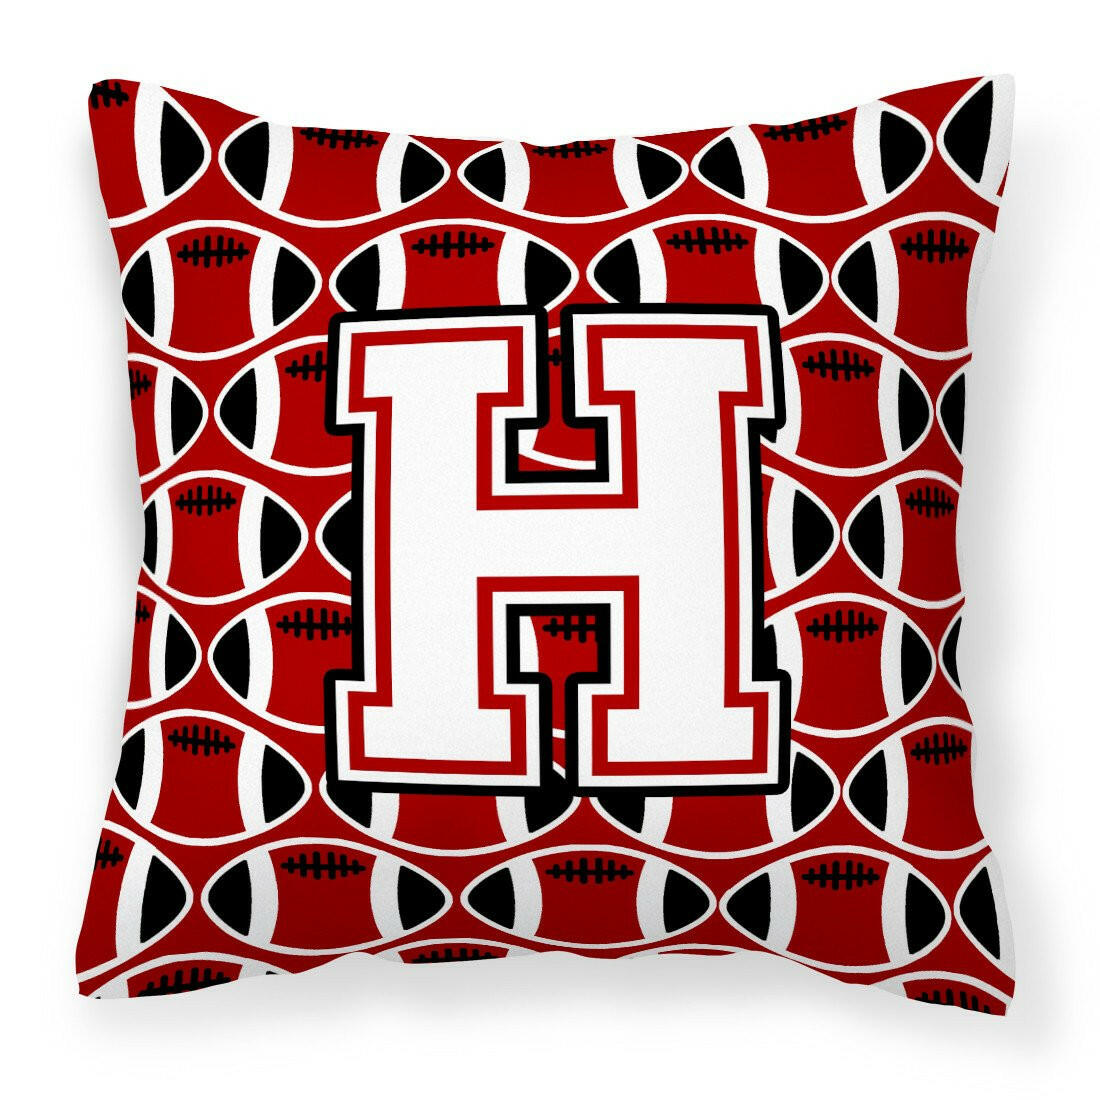 Letter H Football Cardinal and White Fabric Decorative Pillow CJ1082-HPW1414 by Caroline's Treasures